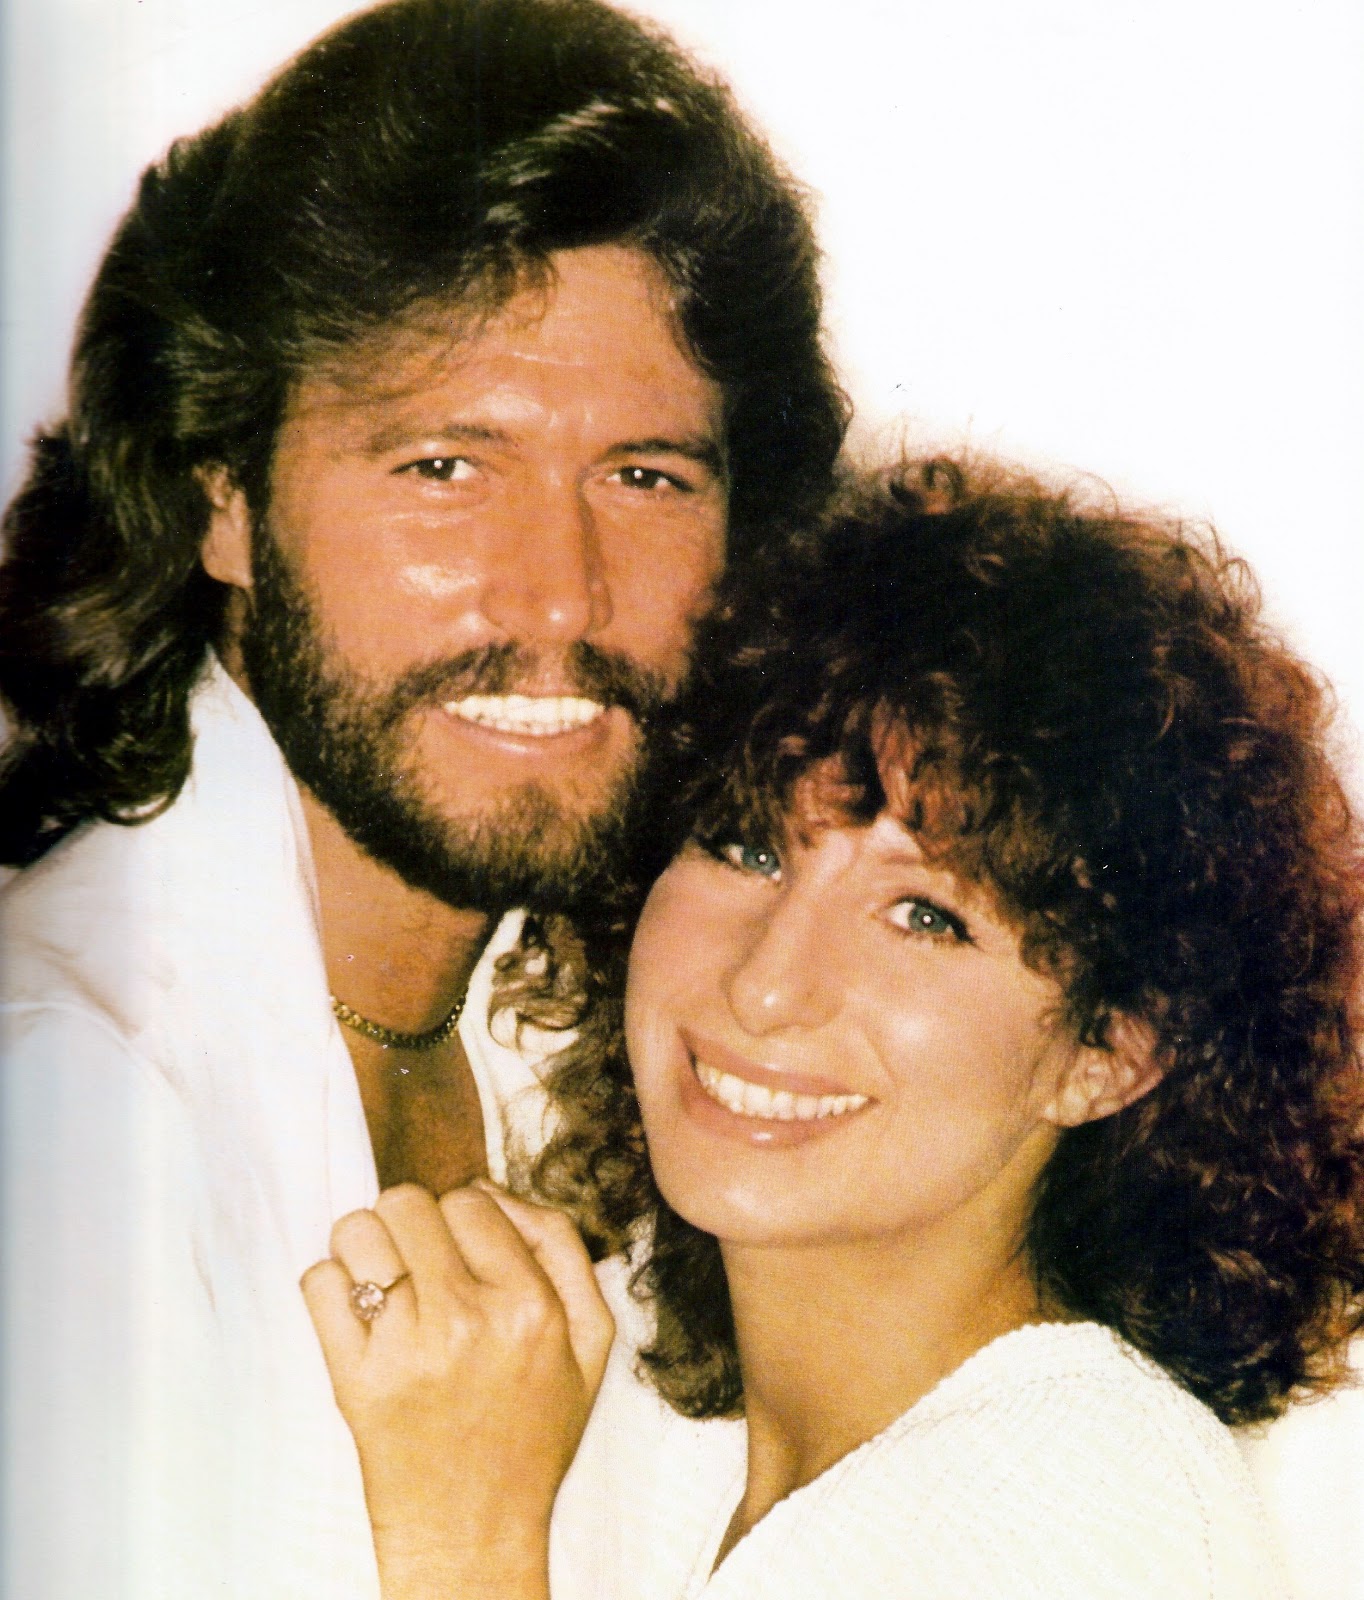 Barry Gibb on Twitter: "Today we're celebrating this incredibly talented  woman that I am lucky to call a dear friend. Happy Birthday  @BarbraStreisand! https://t.co/sA4ChfKY2c" / Twitter